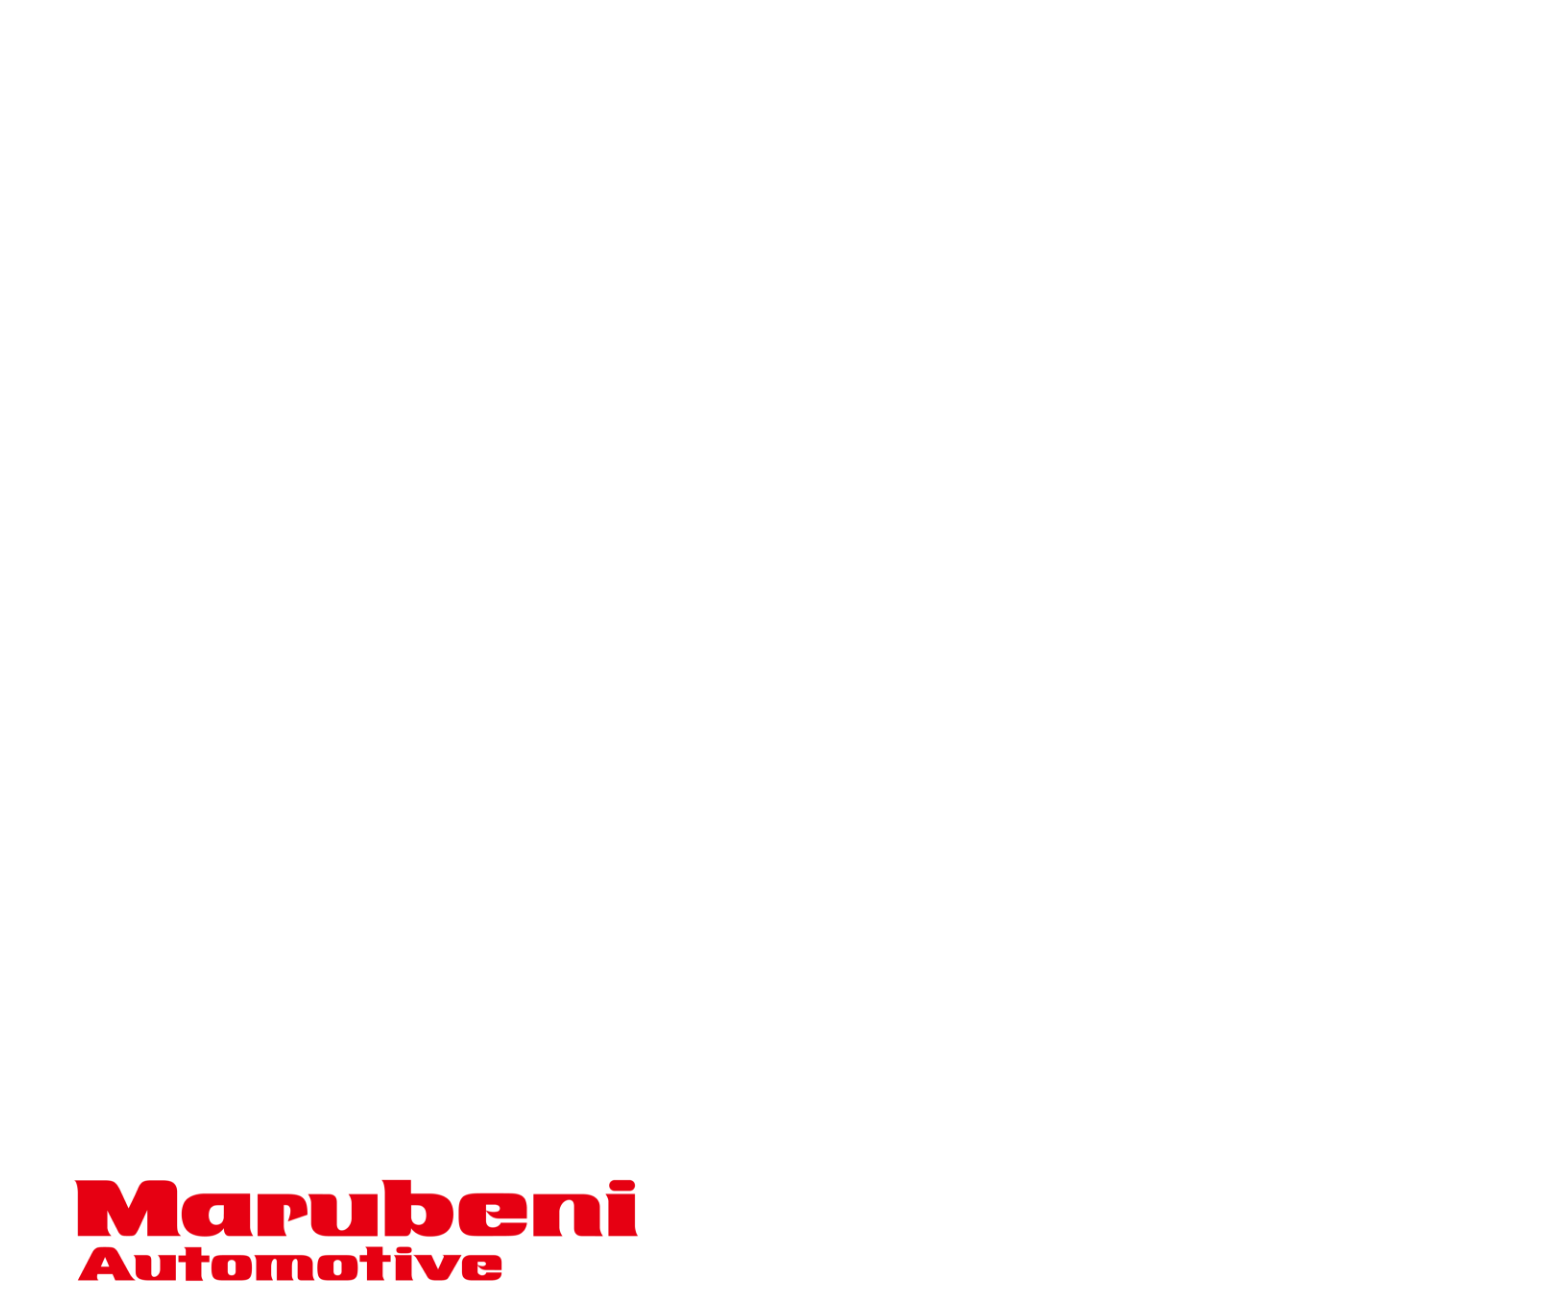 GENERATING MOBILITY FUTURE